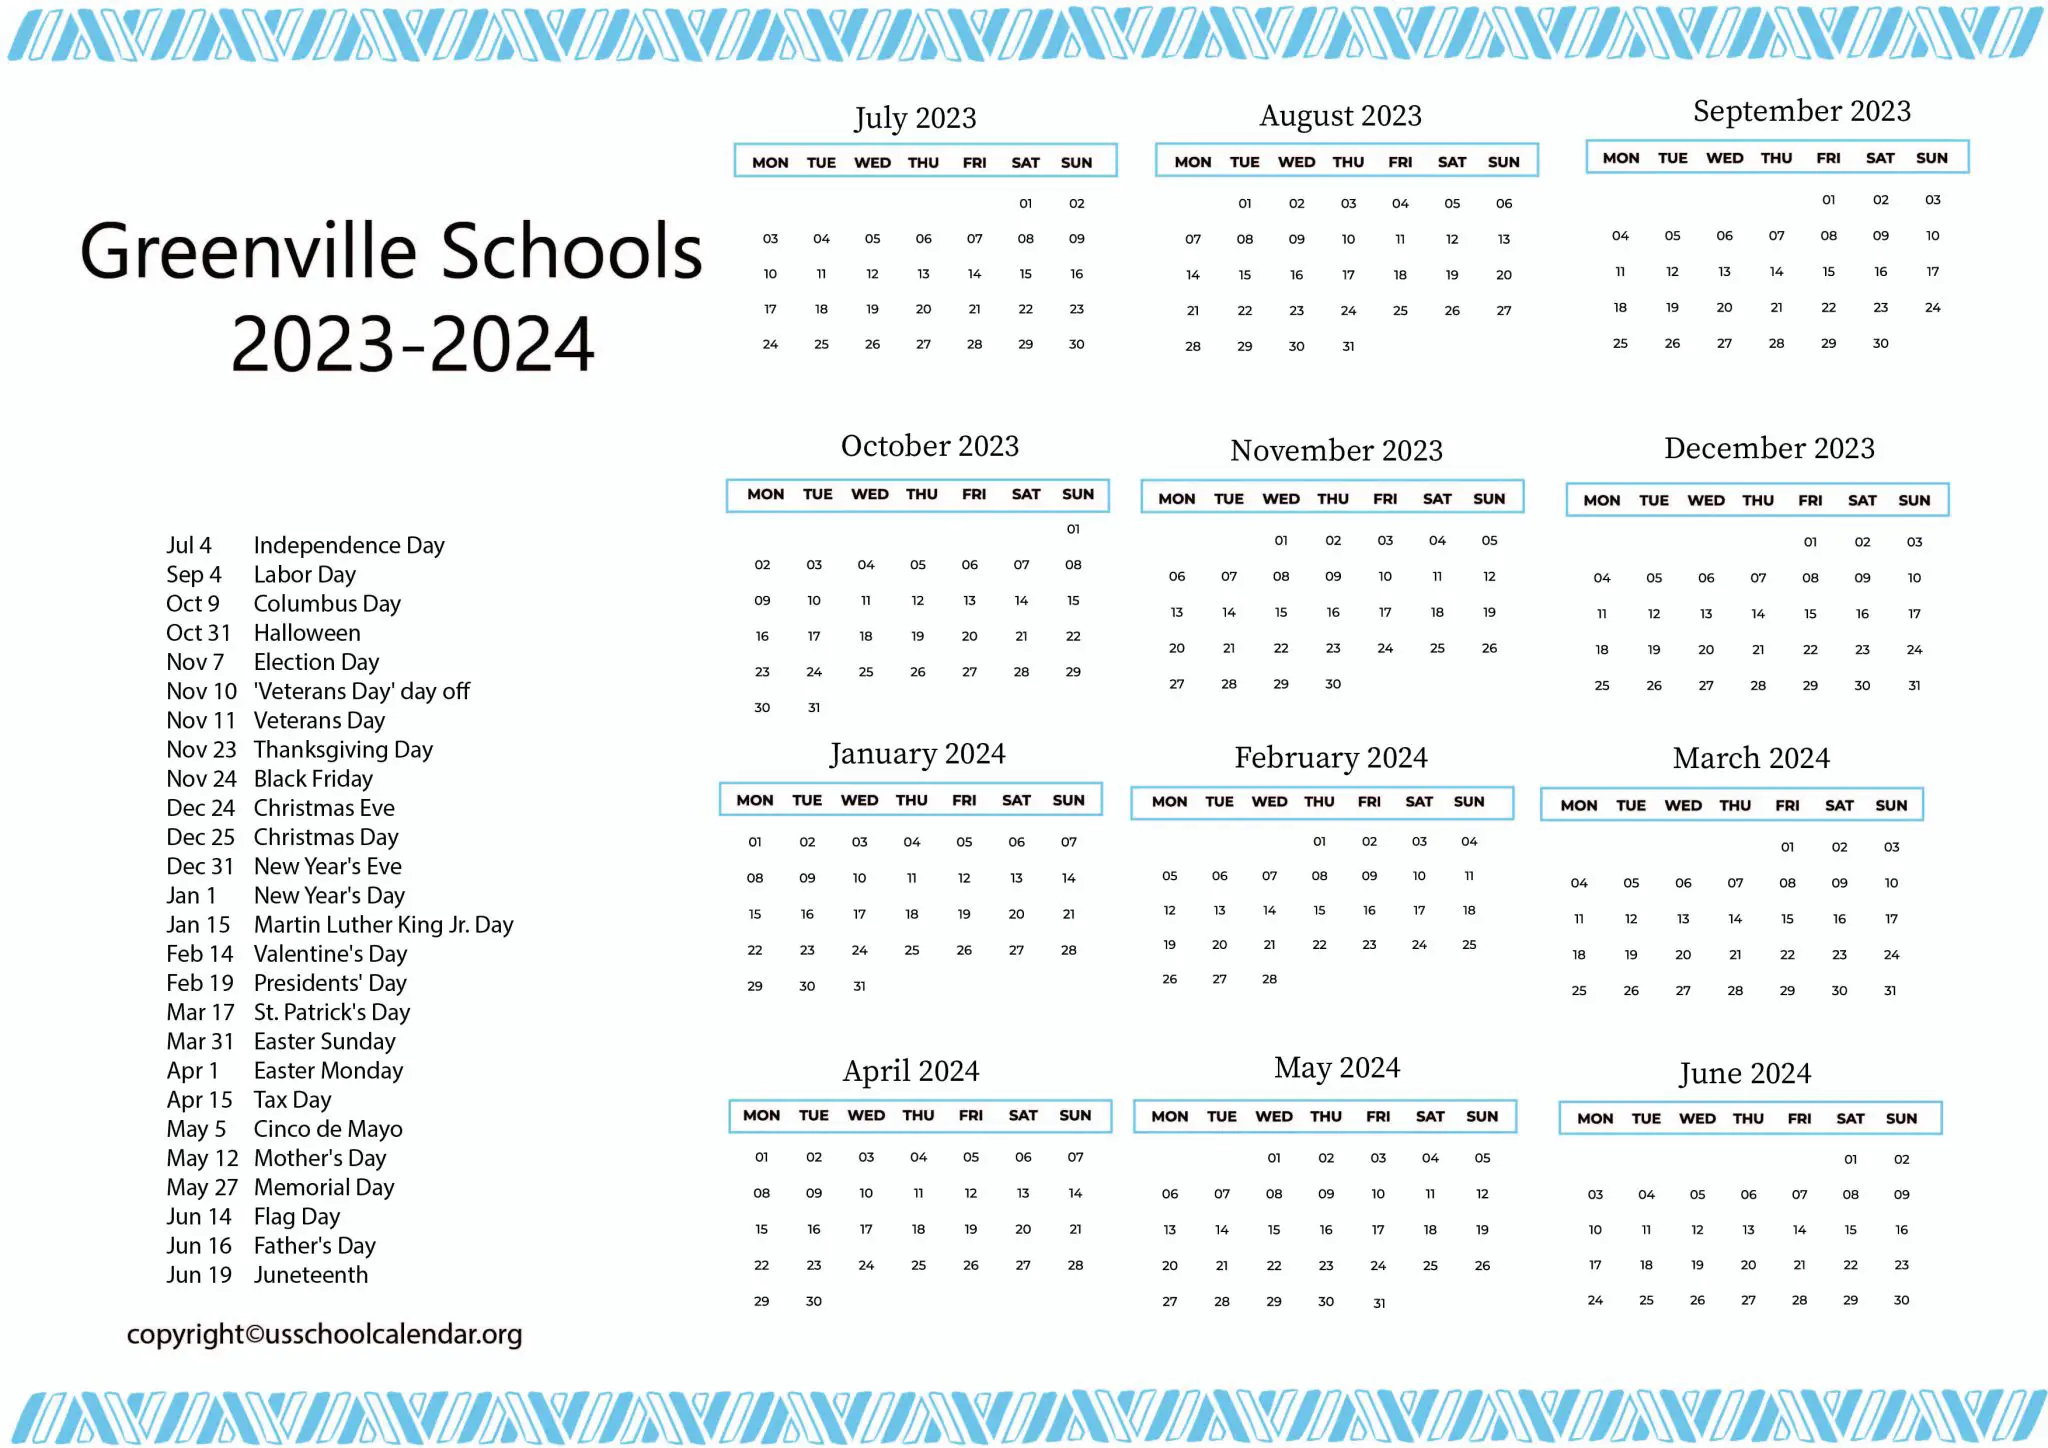 Greenville Schools Calendar with Holidays 2023 2024